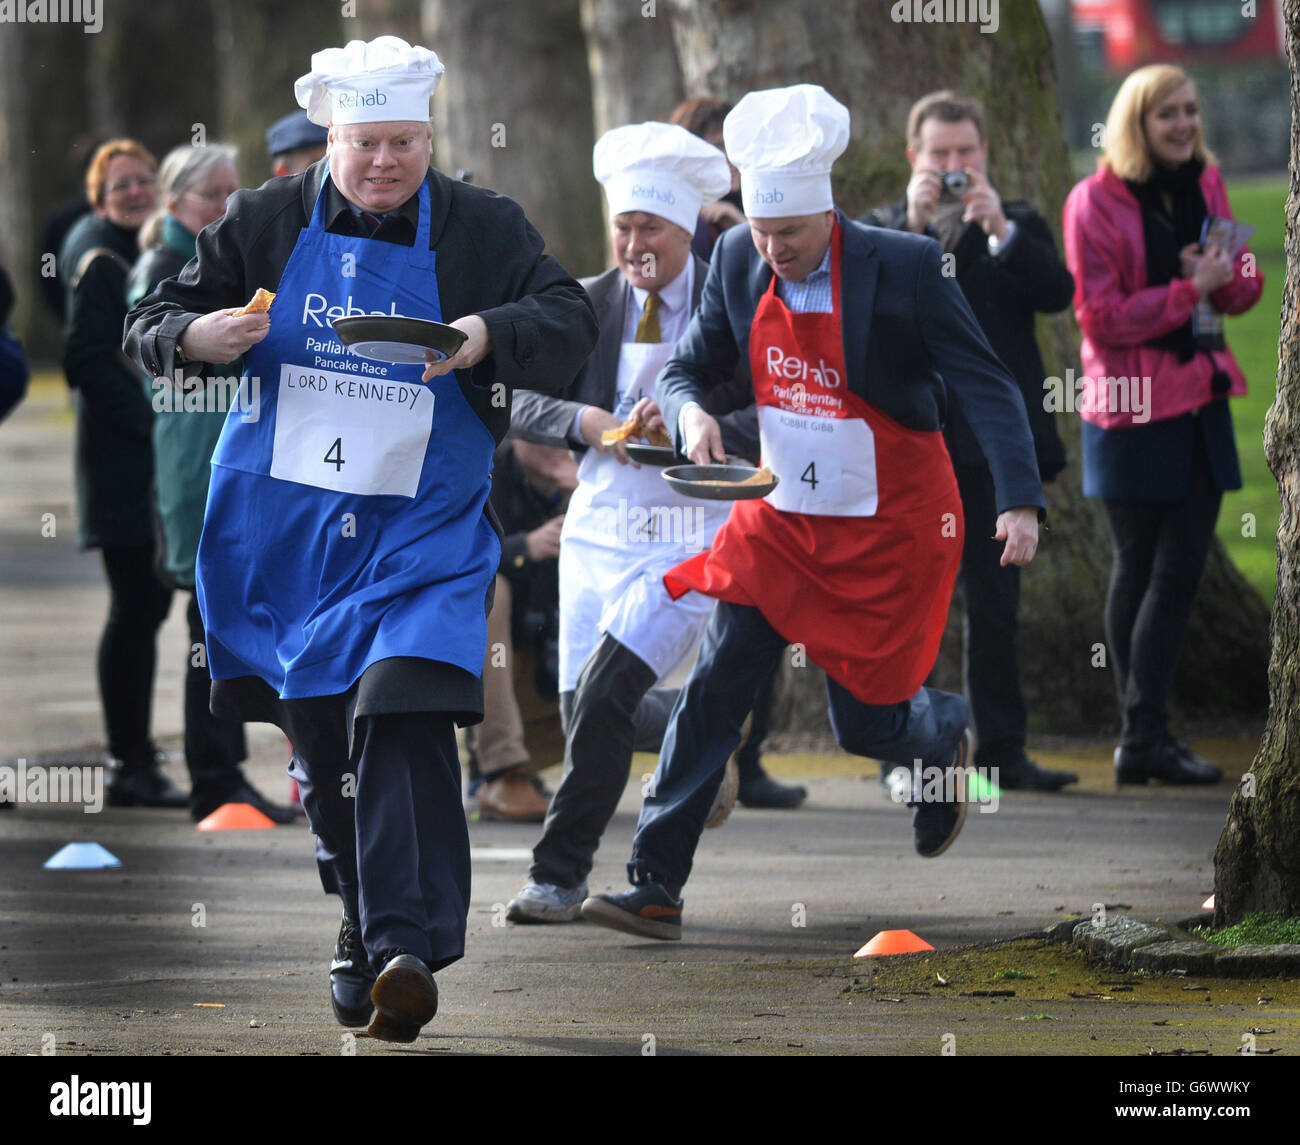 MP David Amess (centre), Lord Kennedy (left) and editor of the Daily Politics, Robbie Gibb (right) take part in the annual Rehab Parliamentary Pancake Race in which MPs, Lords and members of the media race each other on pancake day to raise money for the charity Rehab. Stock Photo